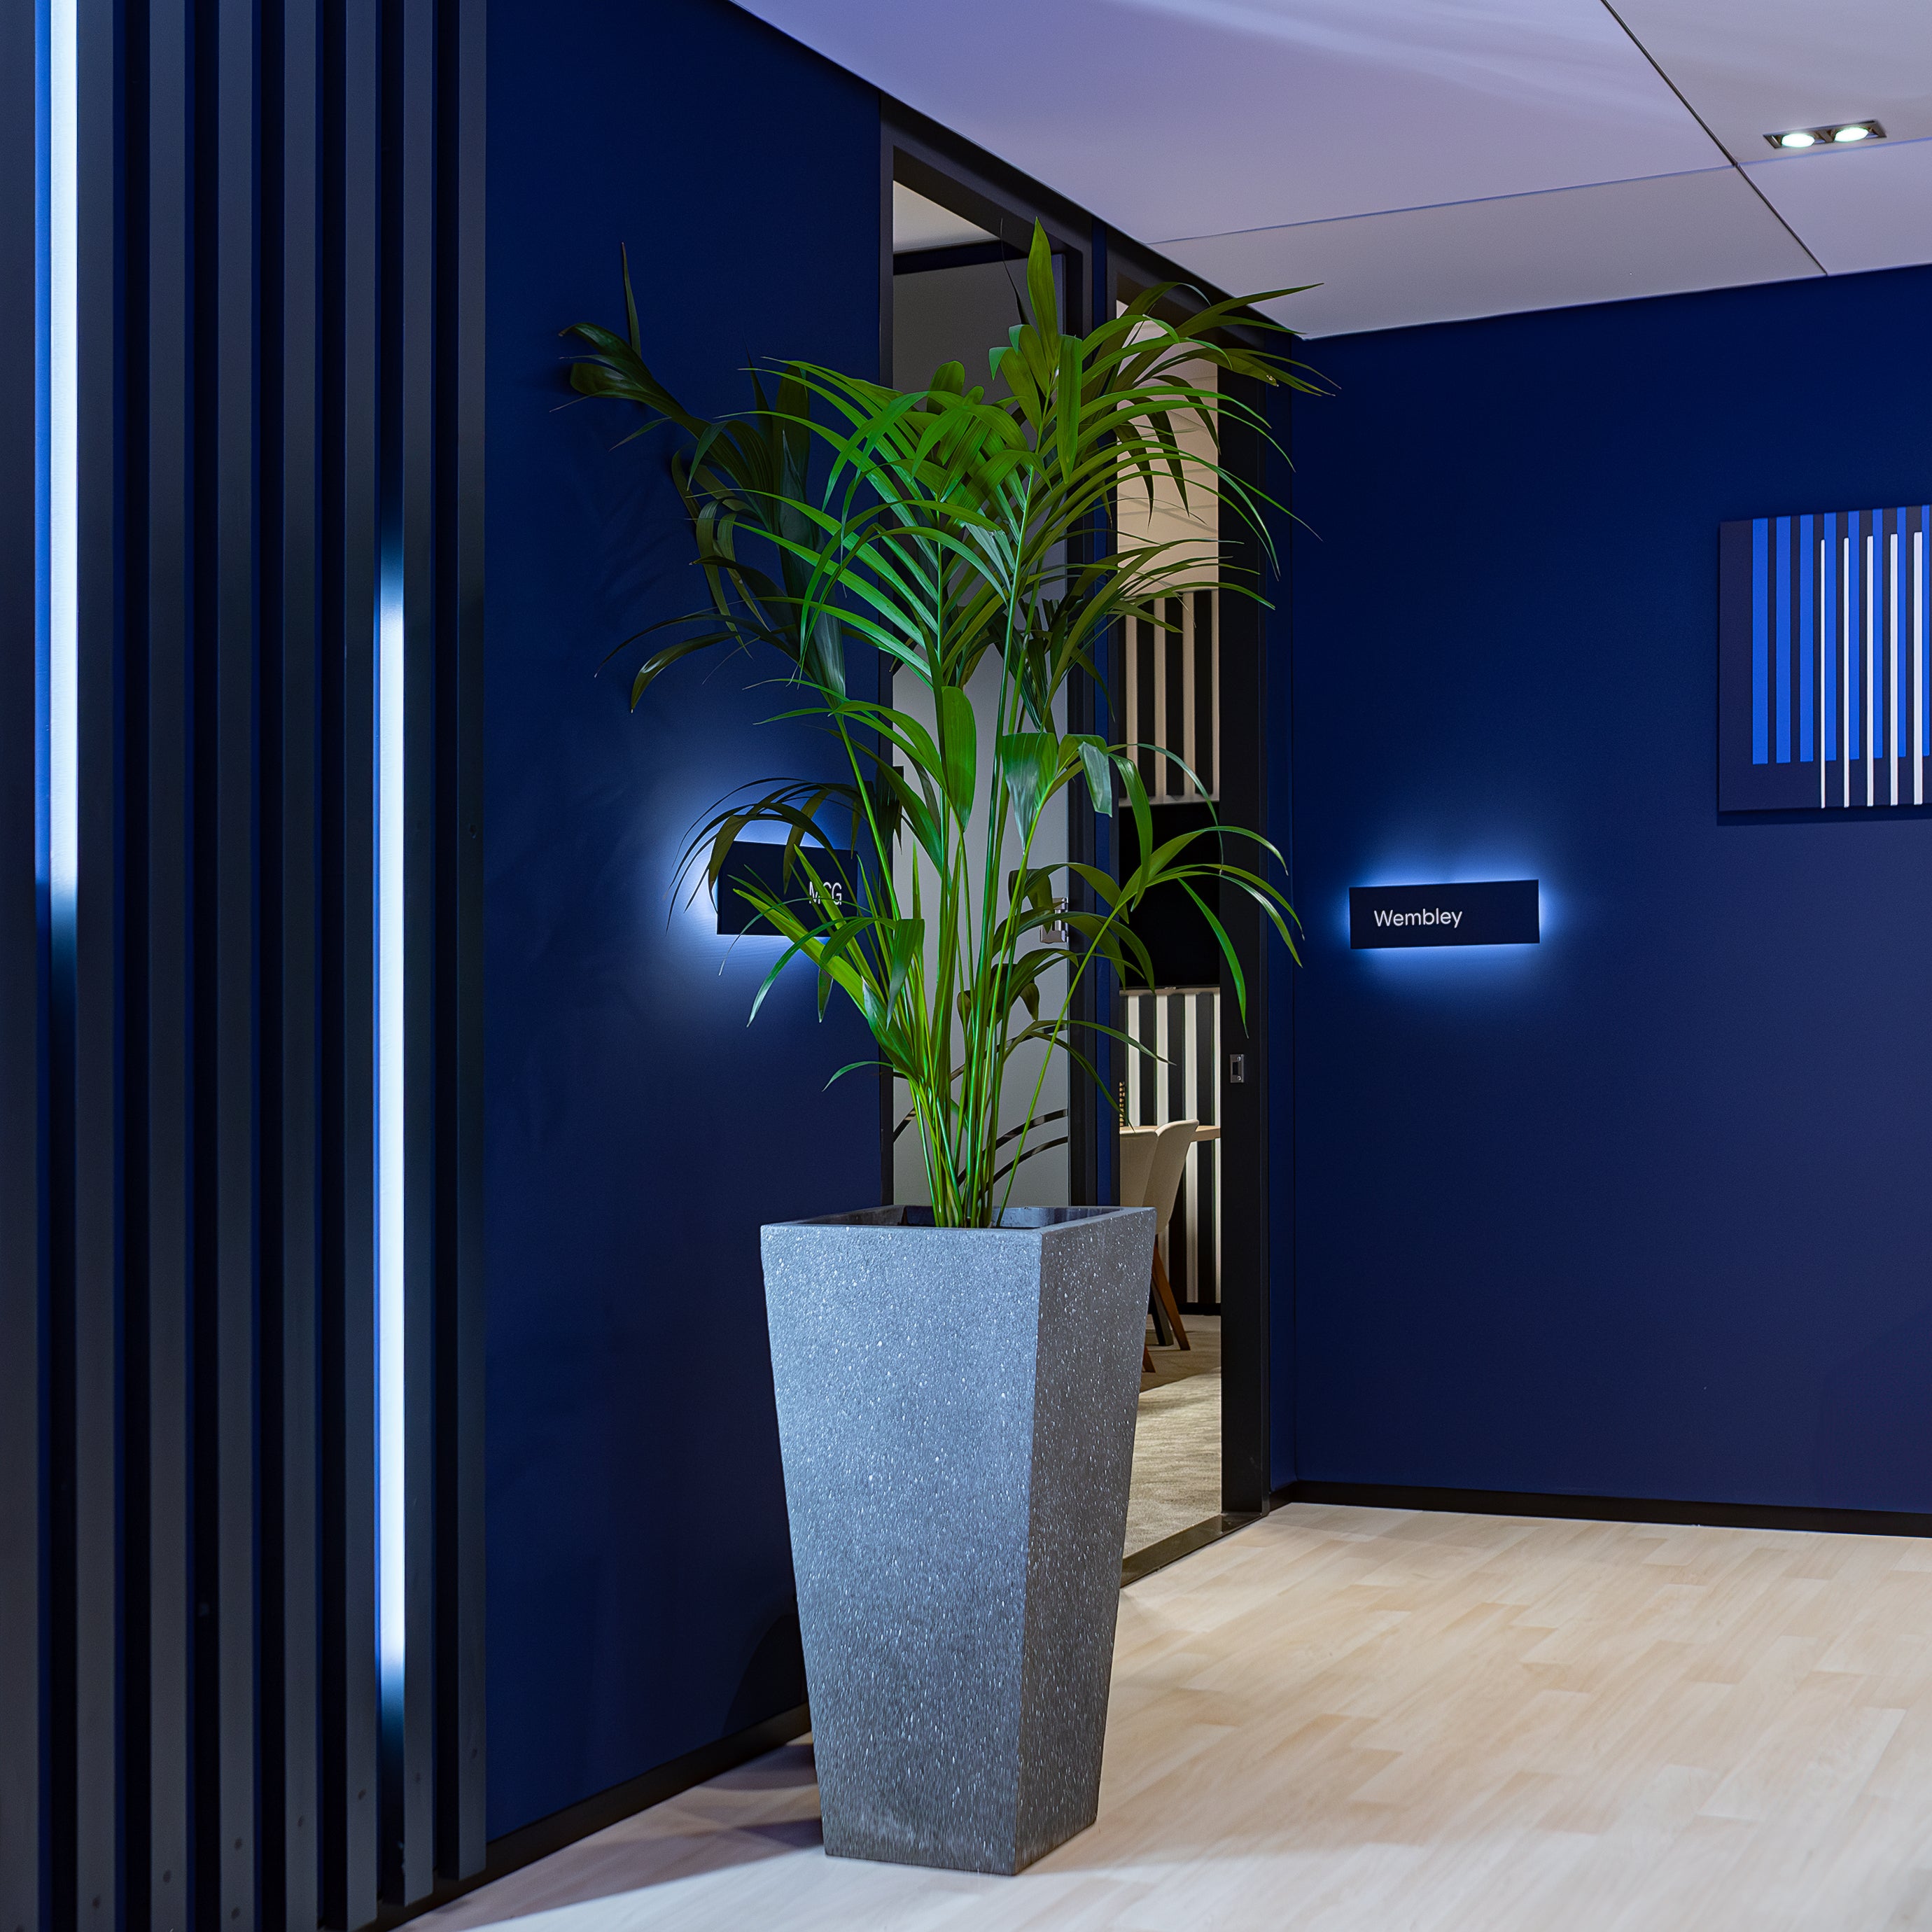 A sleek, modern and intimate corner at the ICE London Exhibition decorated with a tall, verdant potted palm enhances the sophisticated ambience of the Genius Sports meeting room entrance. A typical Plant Hire for Corporate Events by Amaranté London.